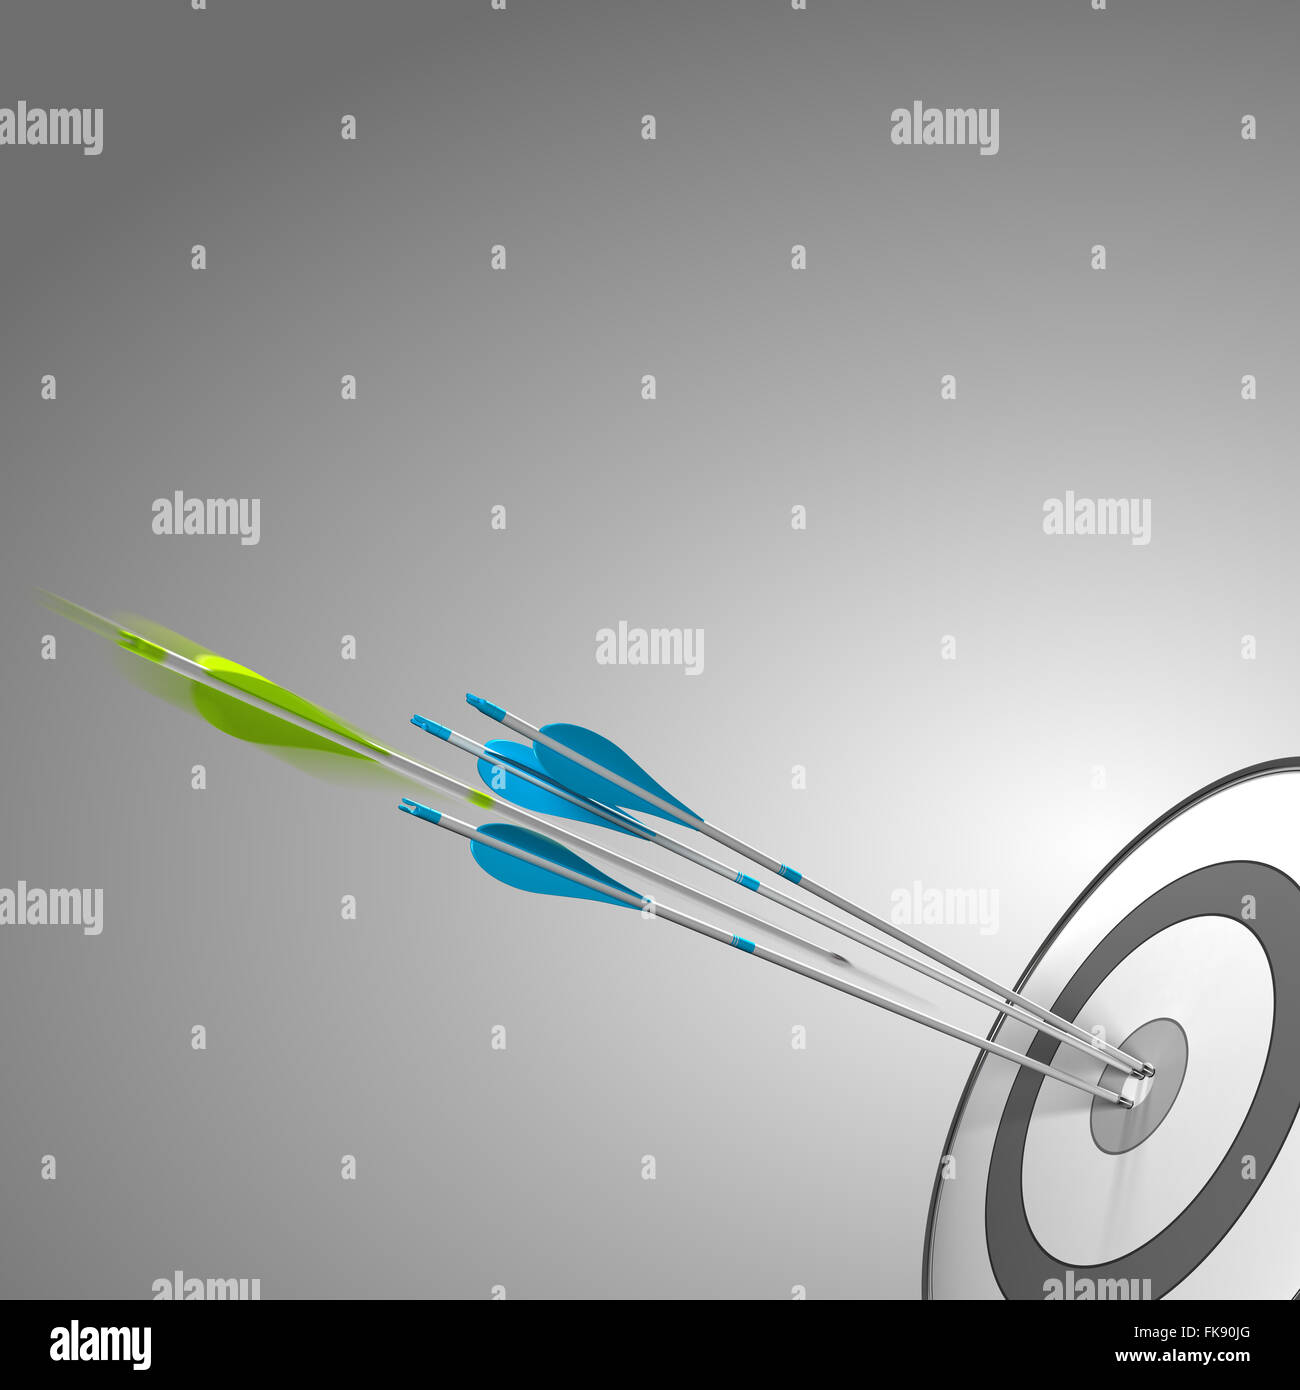 Target with three blue arrows hitting the center, plus a green arrow about to hit the bulleye. image over grey background with c Stock Photo